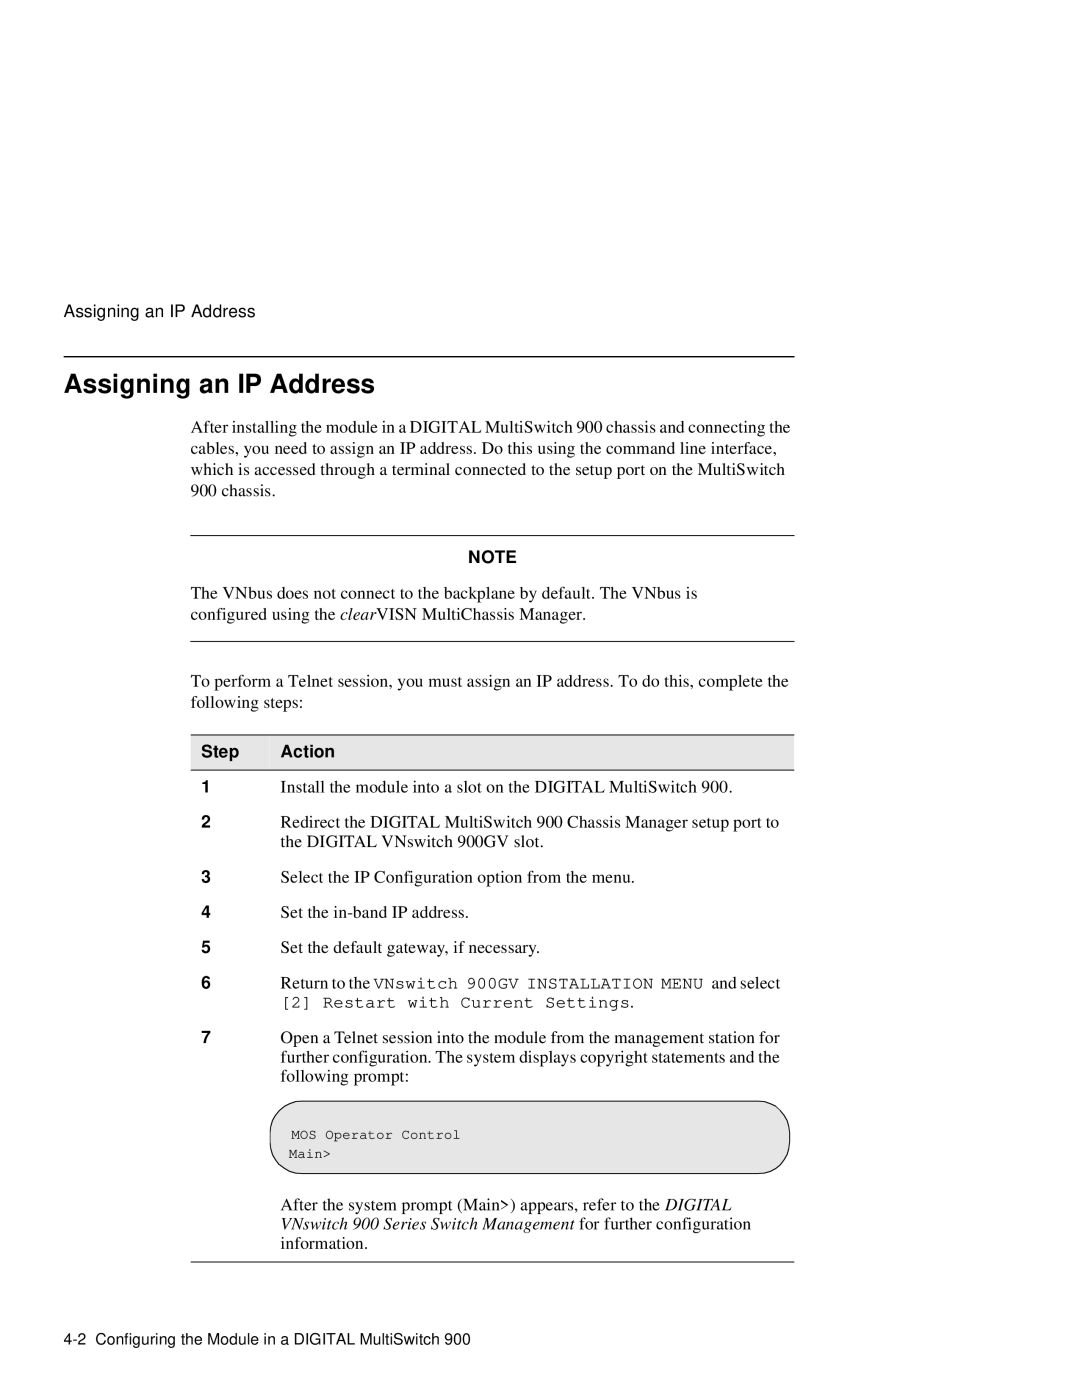 Network Technologies 900GV manual Assigning an IP Address, Step Action 